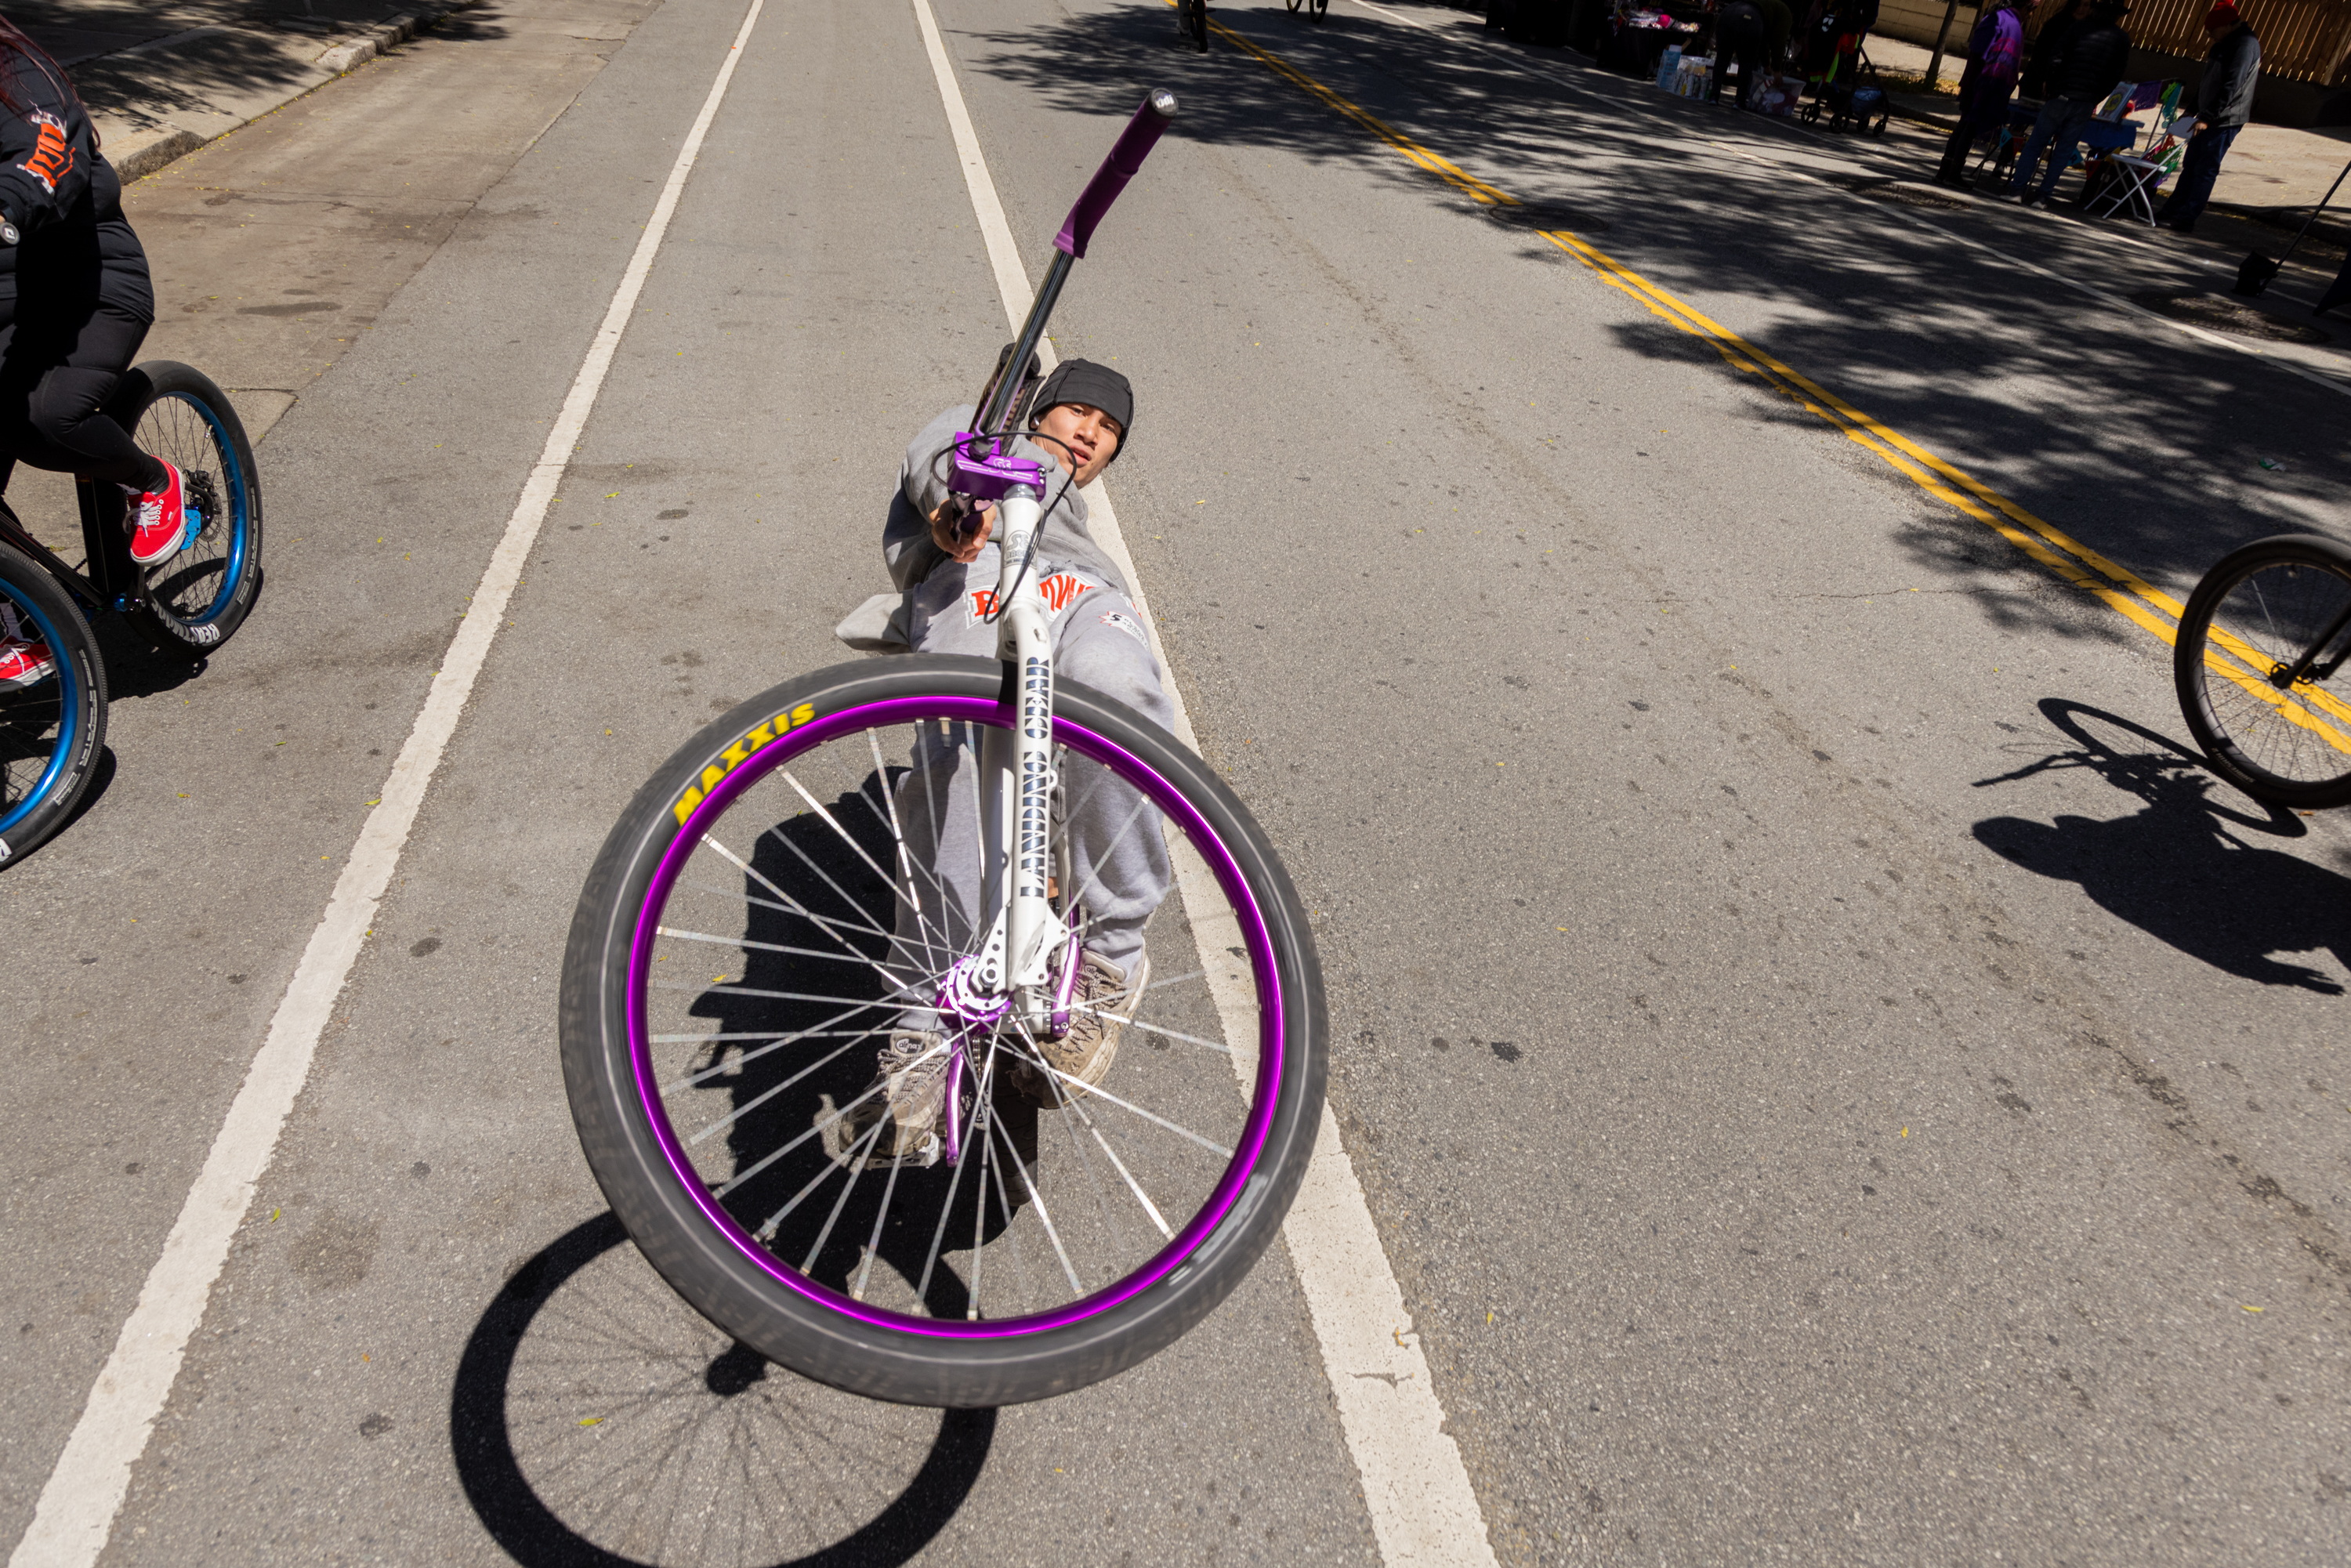 A child performs a bike trick, lifting the front wheel towards the camera, on a sunny street with onlookers.